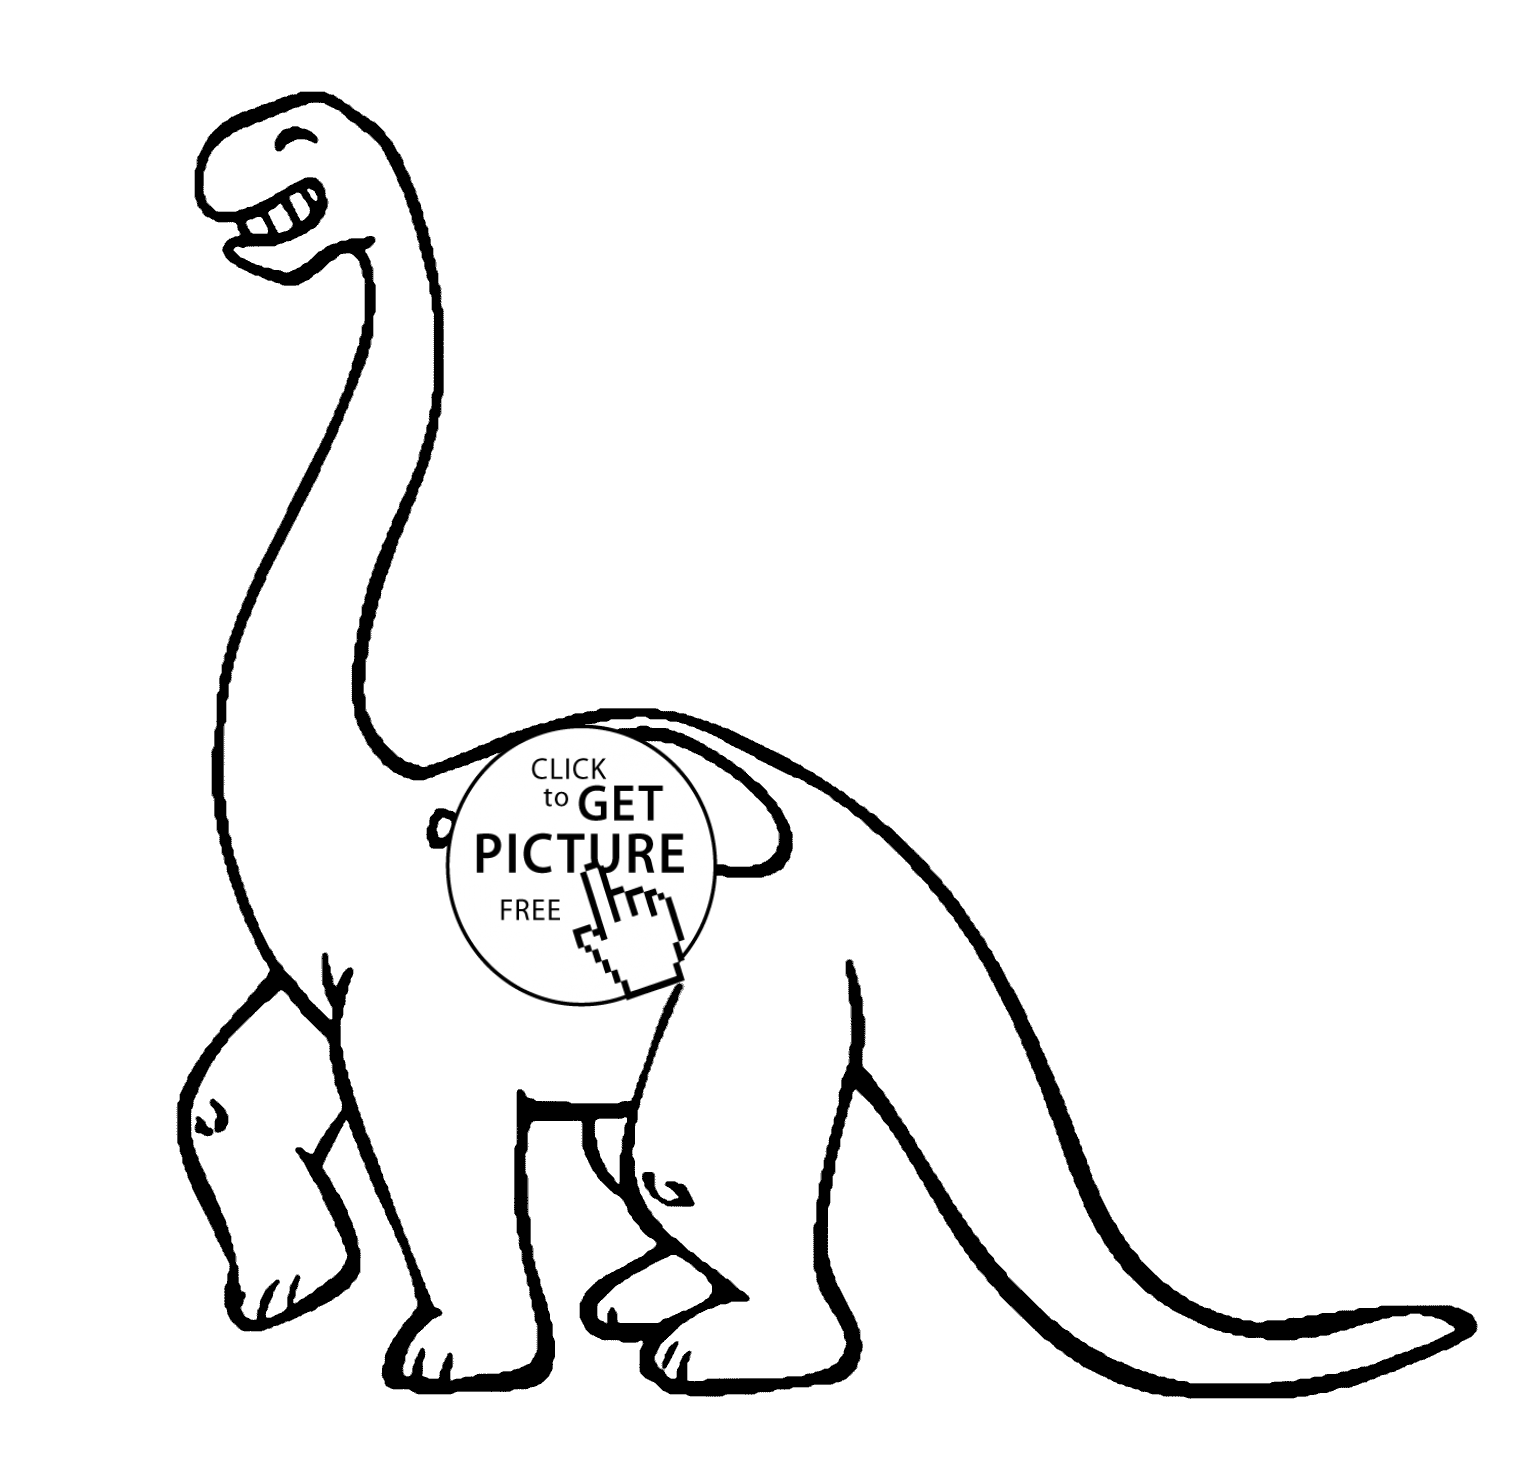 Fun Dinosaur Coloring Pages Coloring Pages